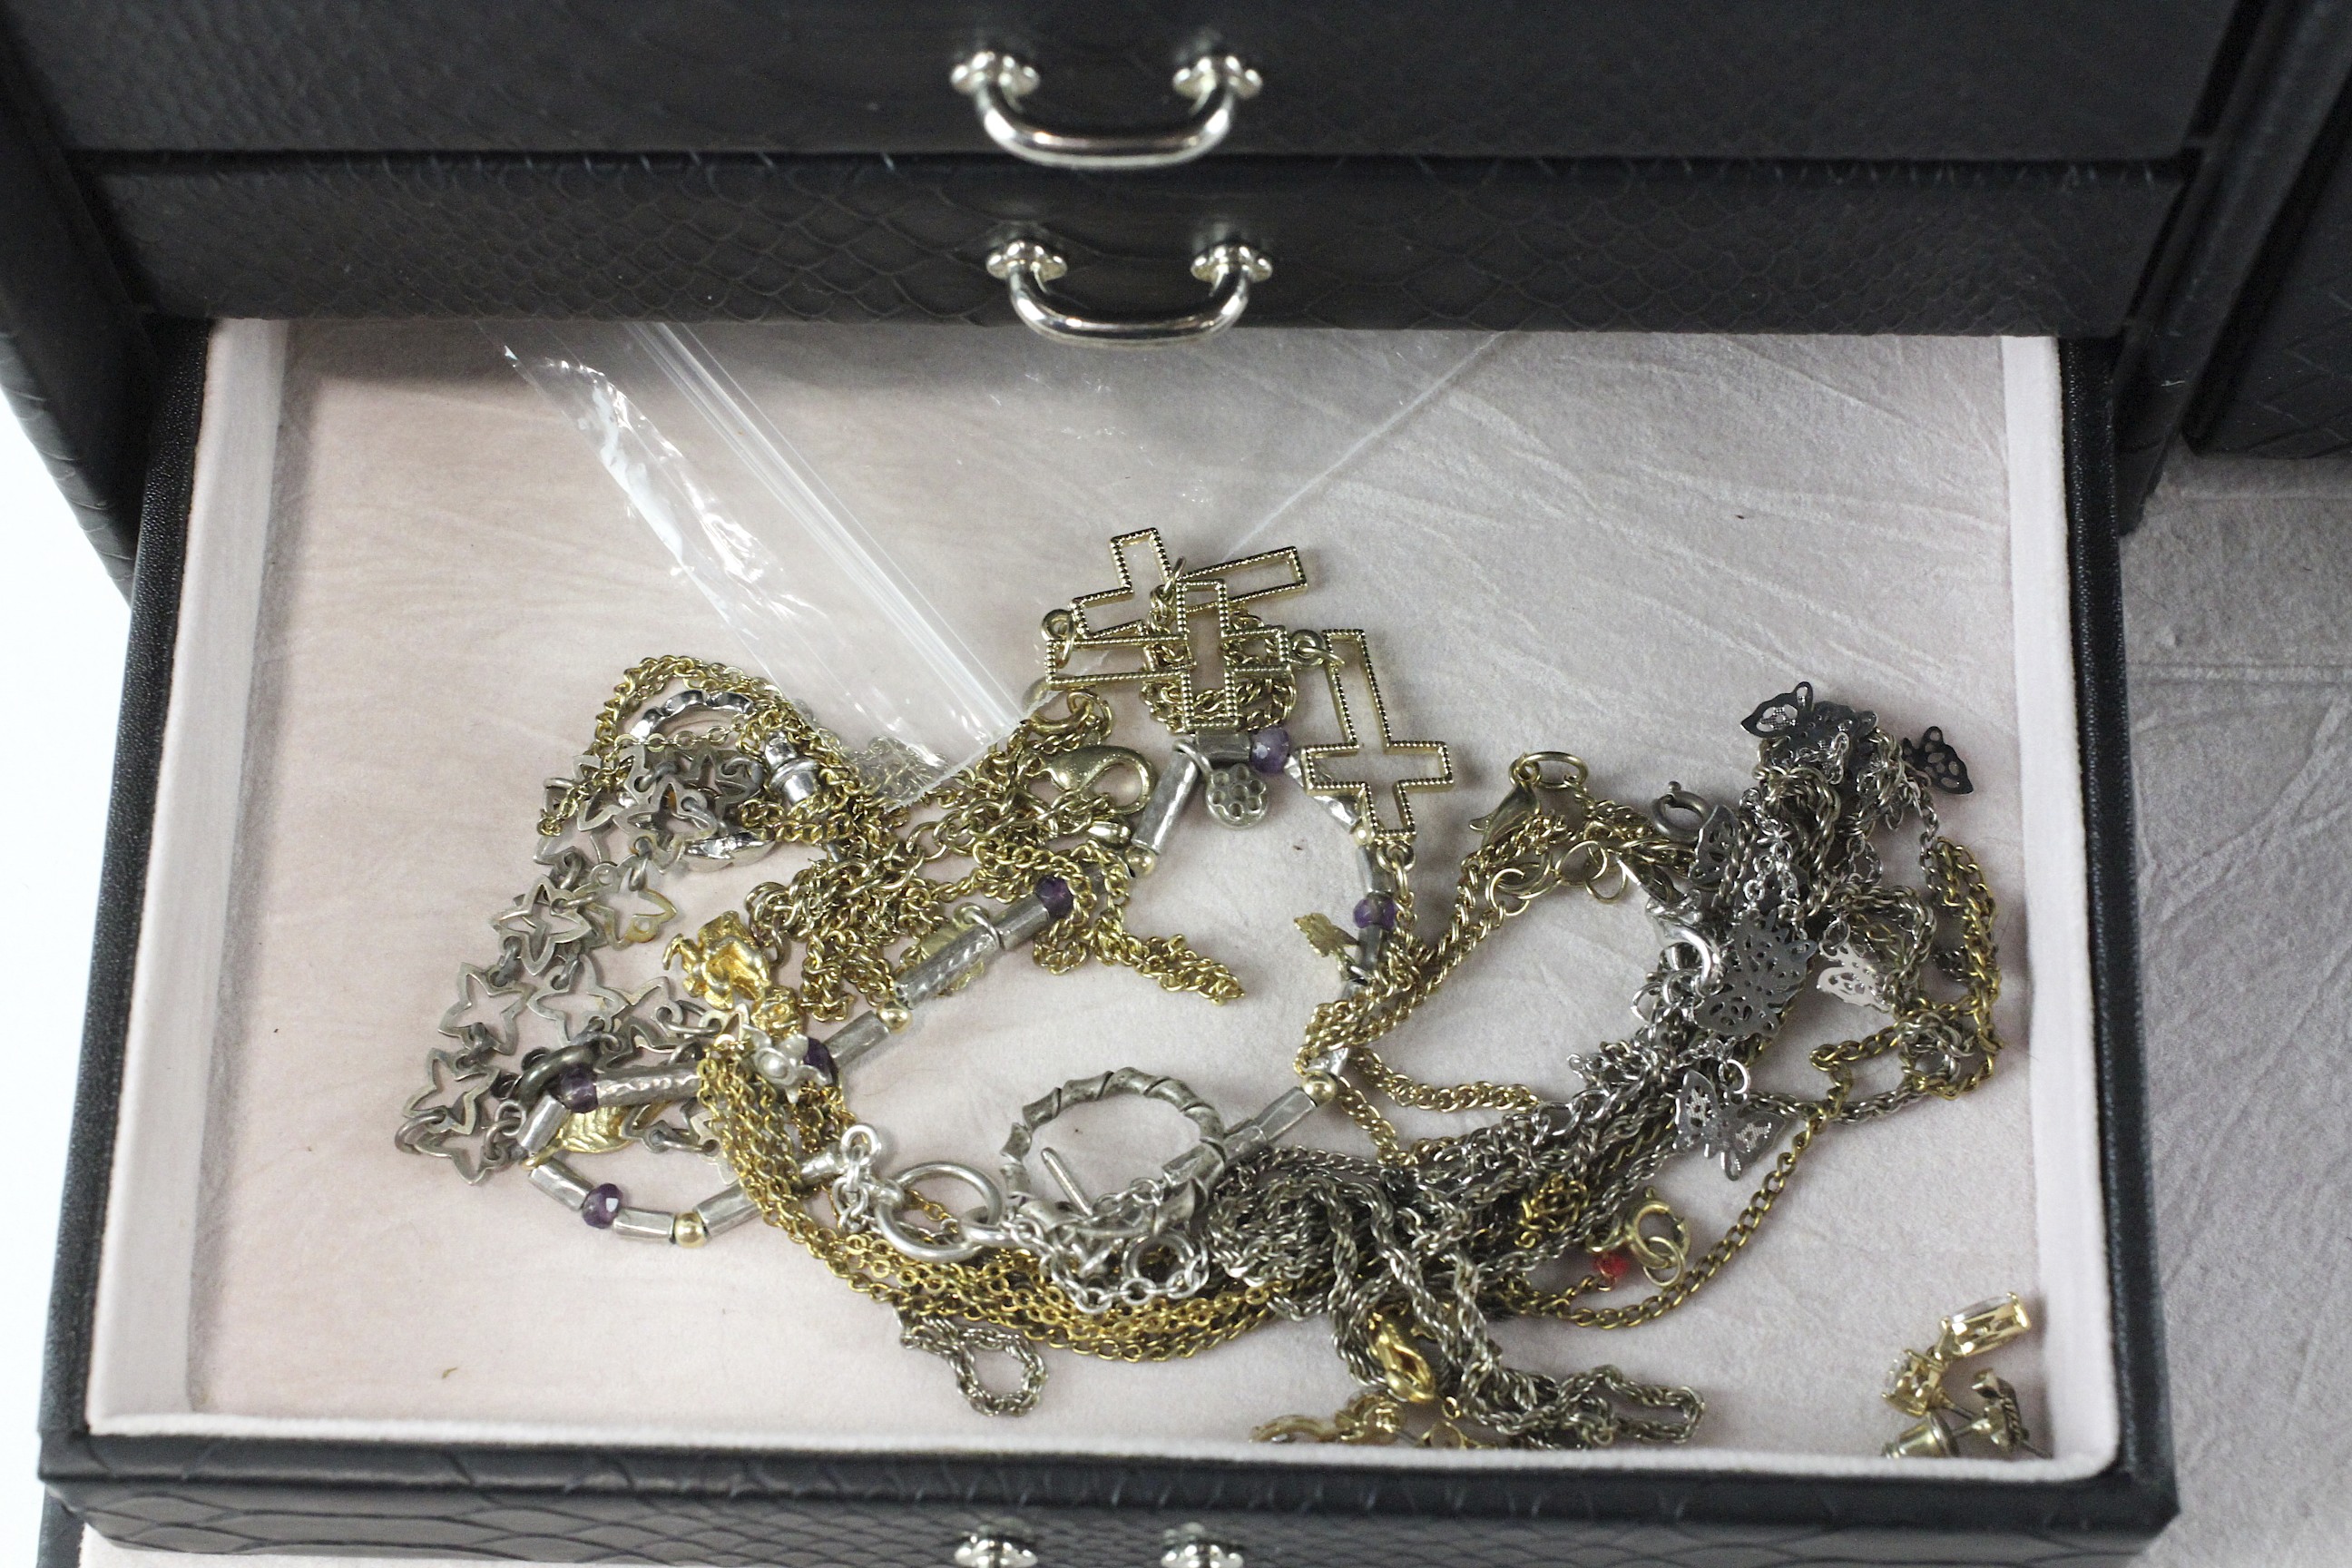 A black jewellery box containing a collection of costume jewellery, including brooches, necklaces, - Image 2 of 4